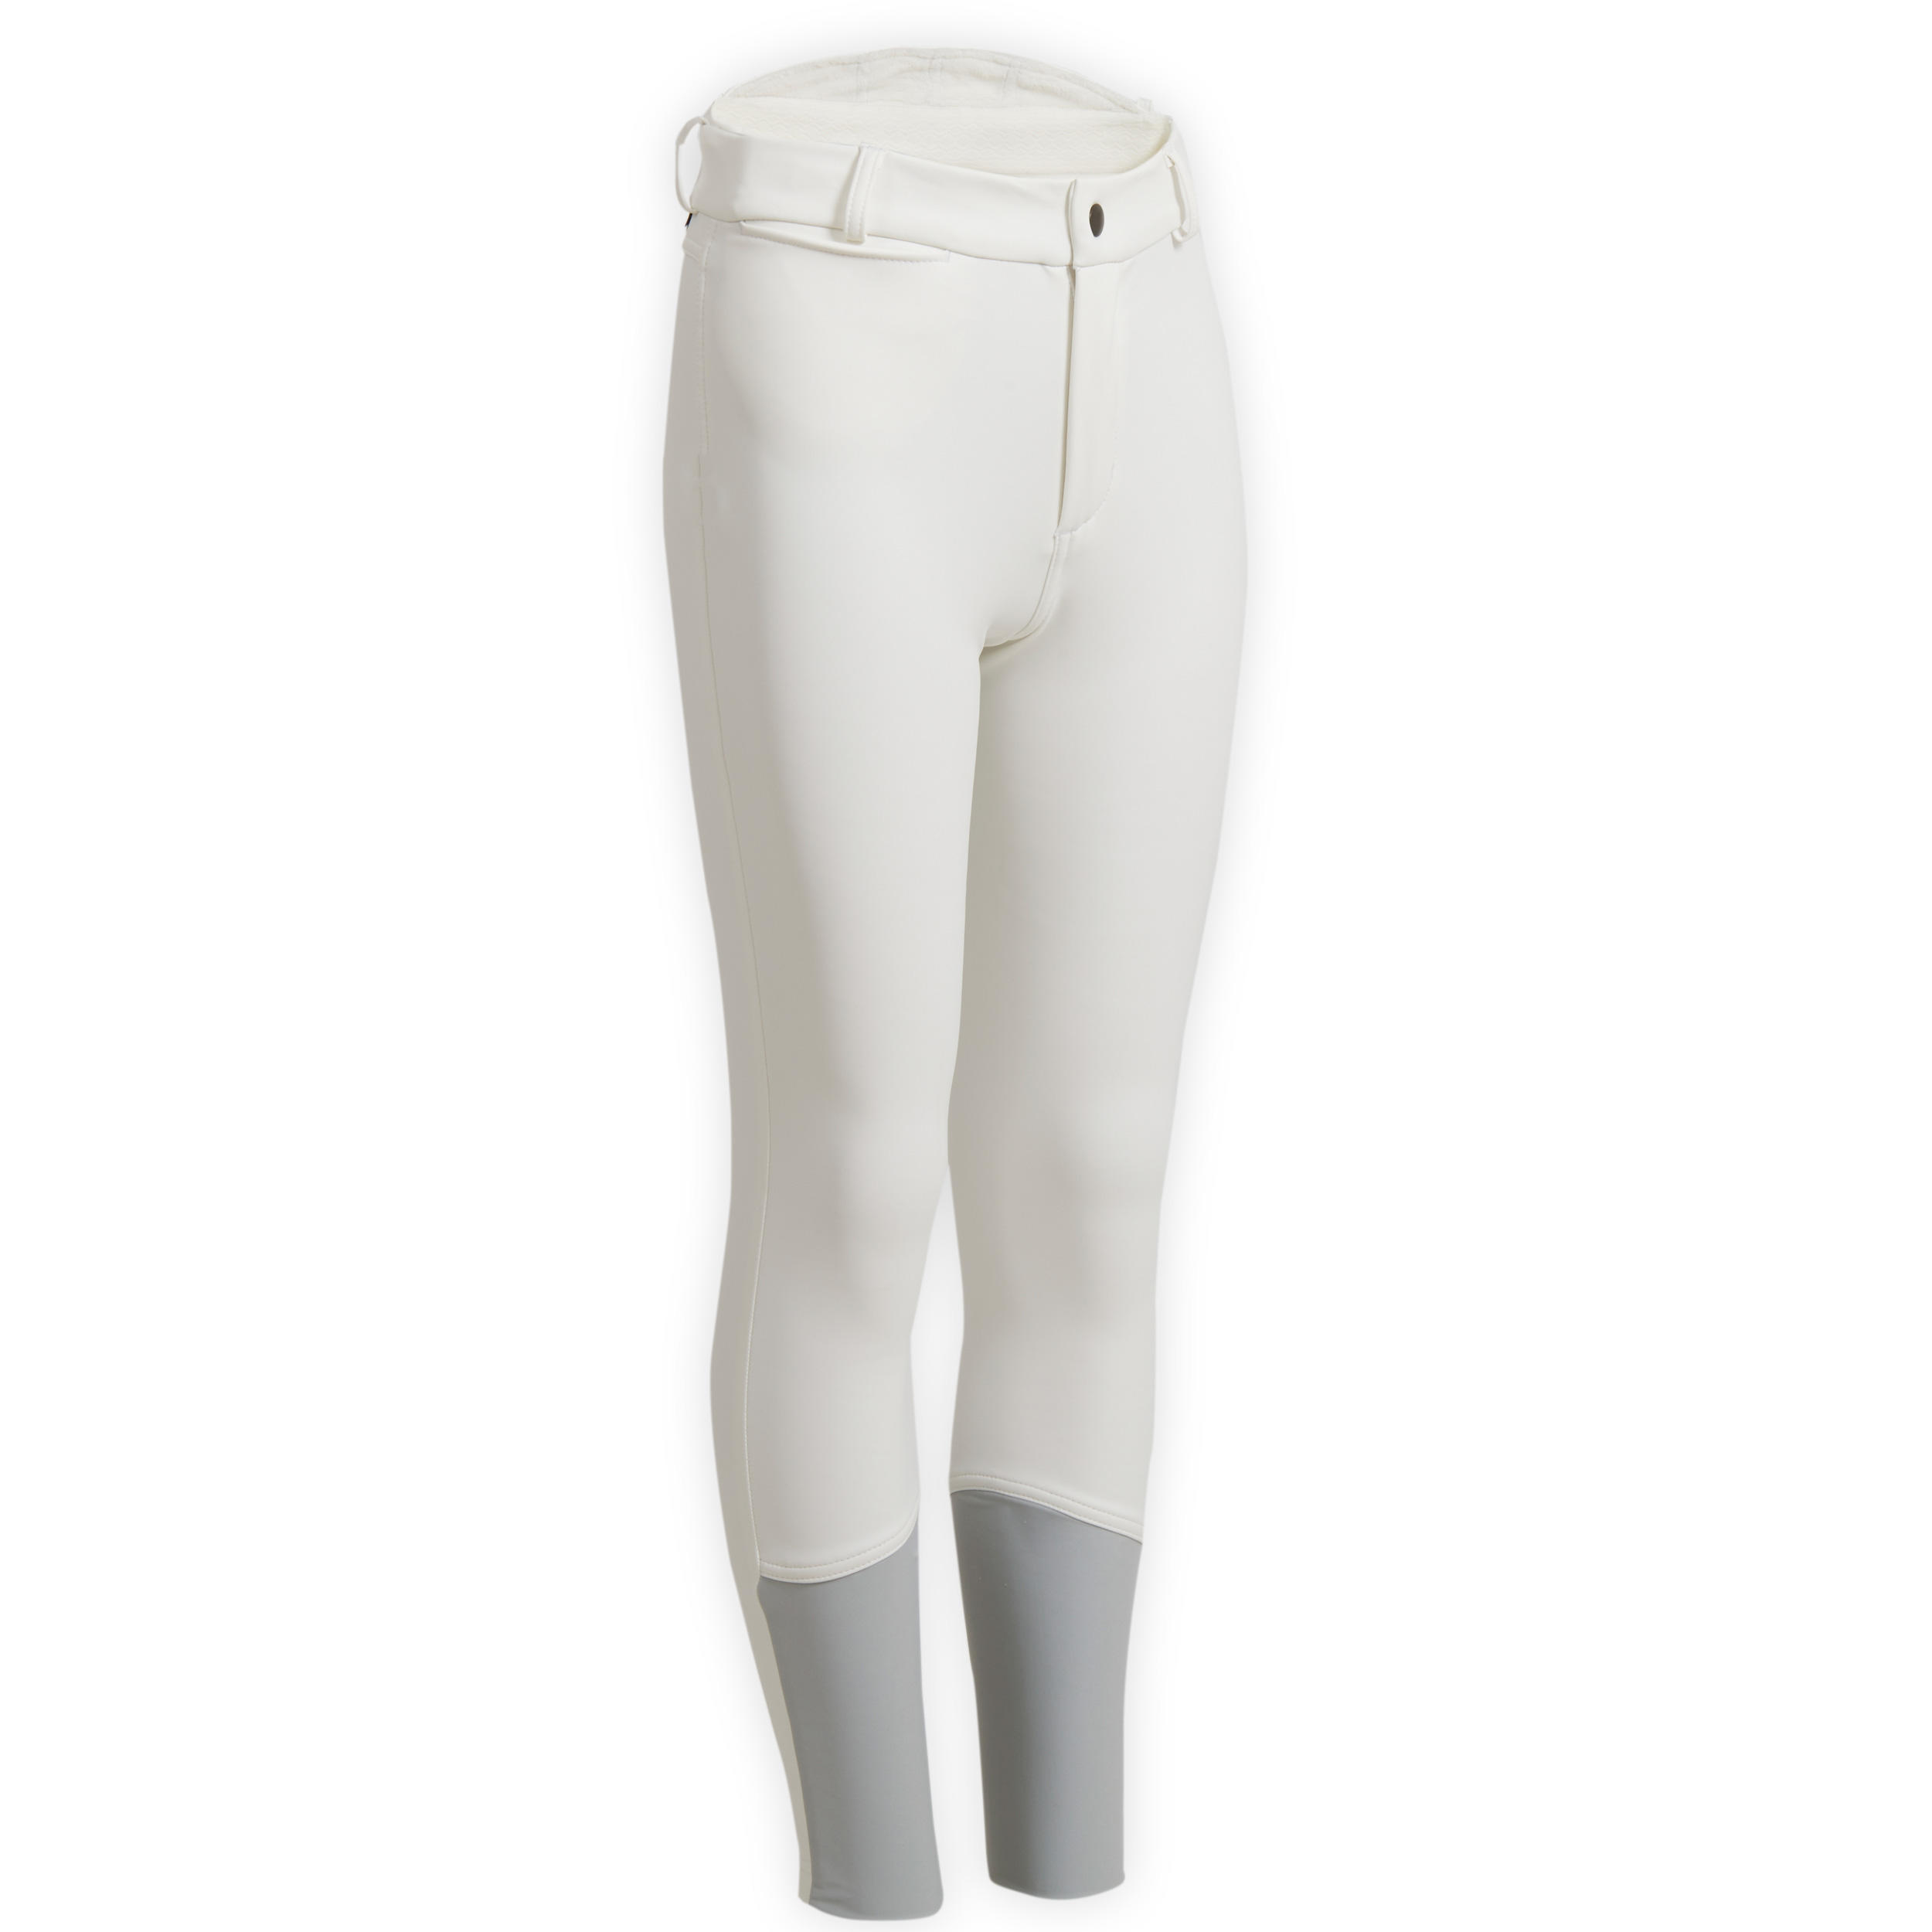 Kids' Horse Riding Warm and Water Repellent Competition Jodhpurs 500 Kipwarm - White 2/9